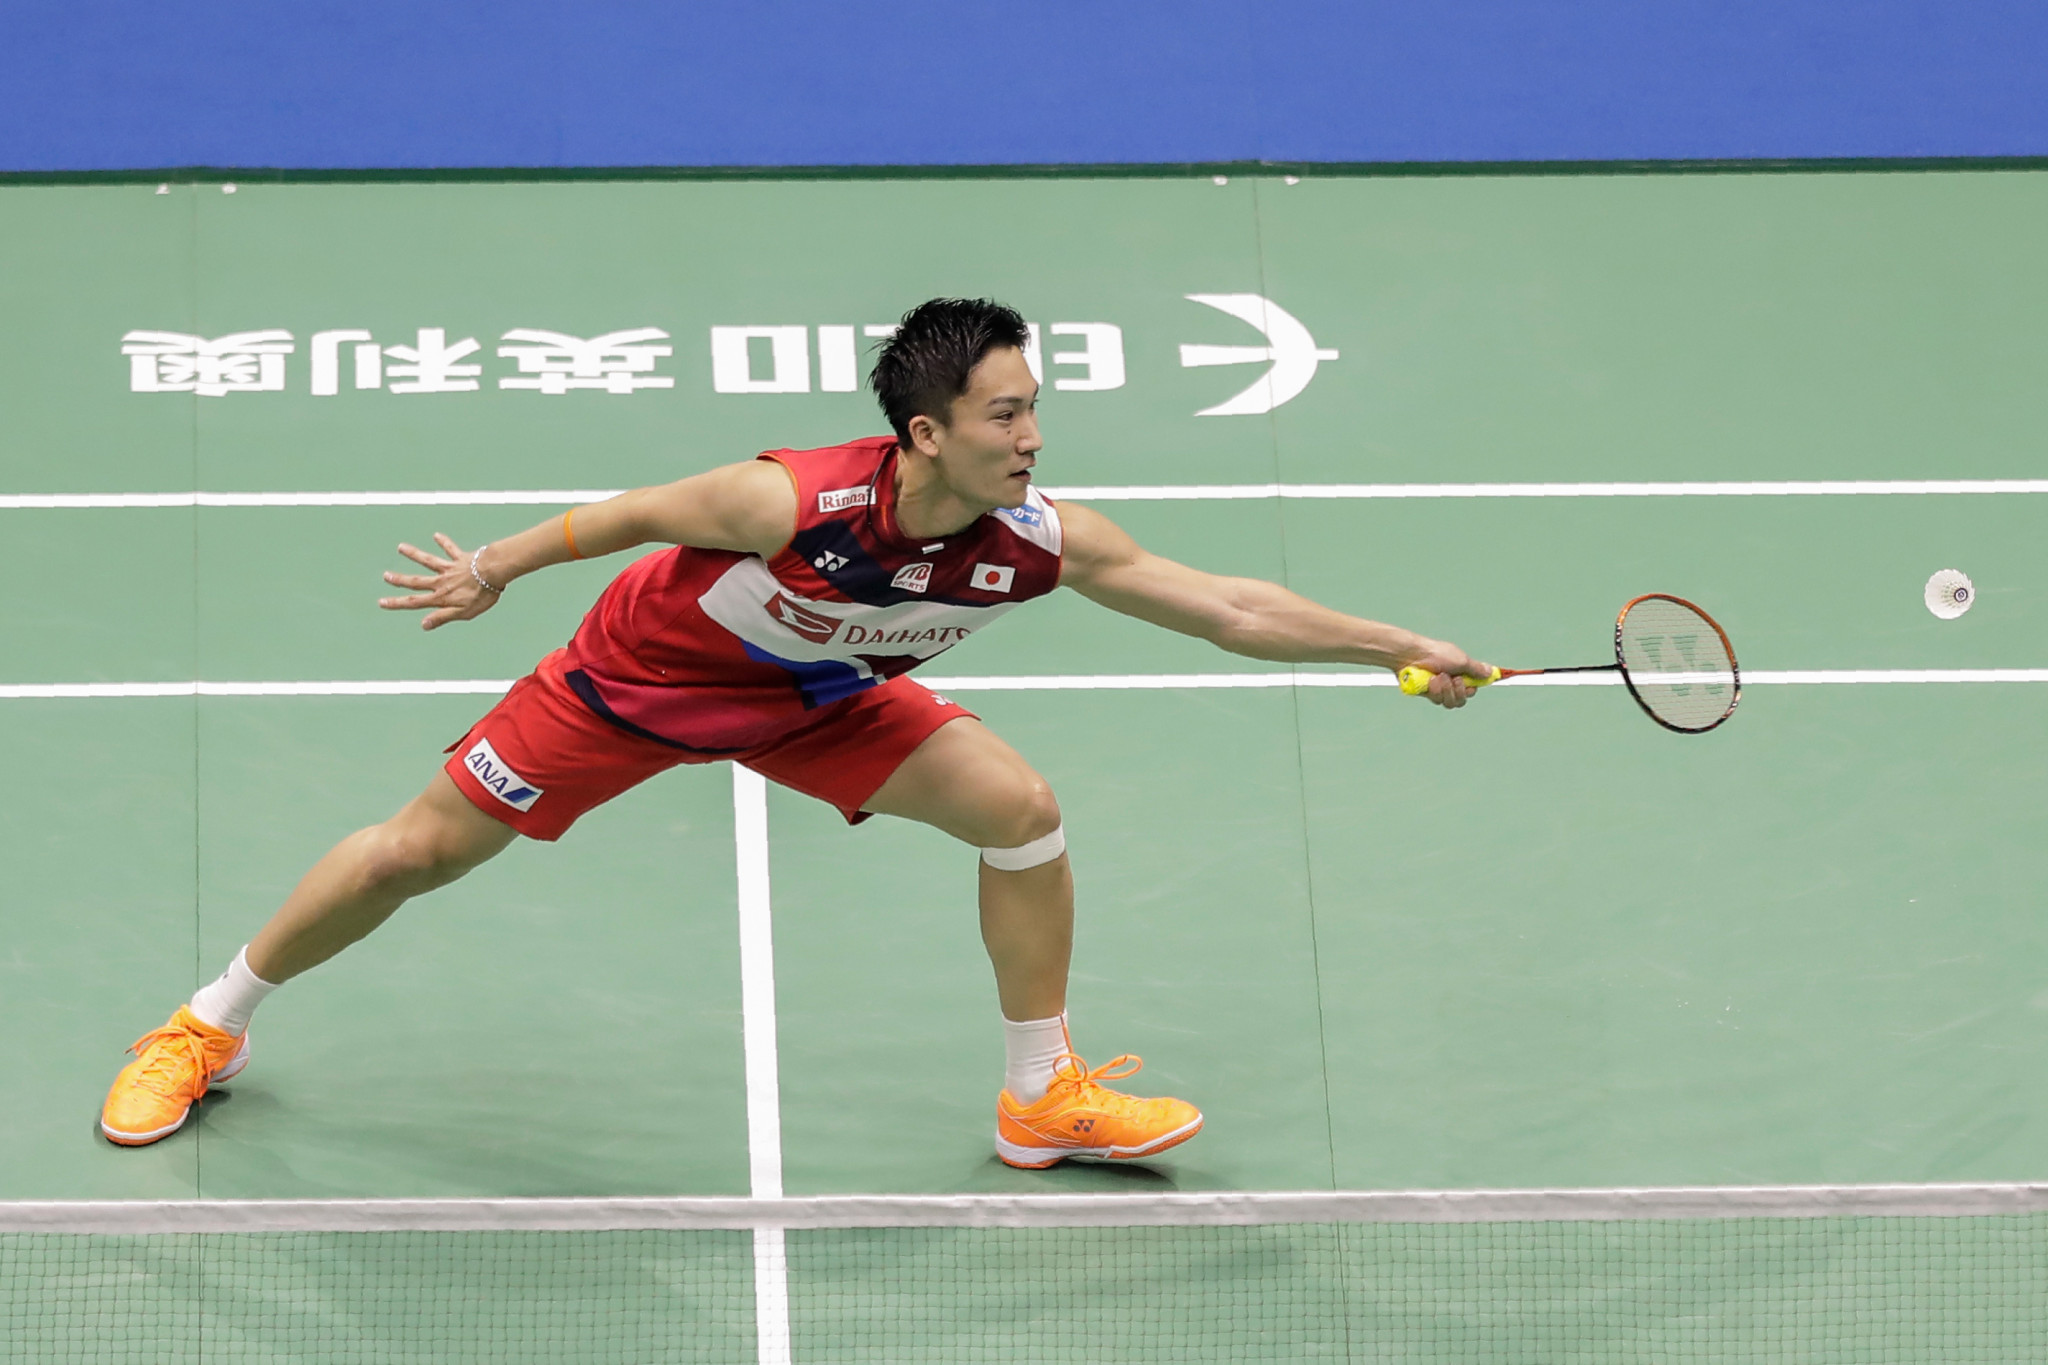 Defending champion Momota fights back to clinch semi-final place at Badminton Asia Championships